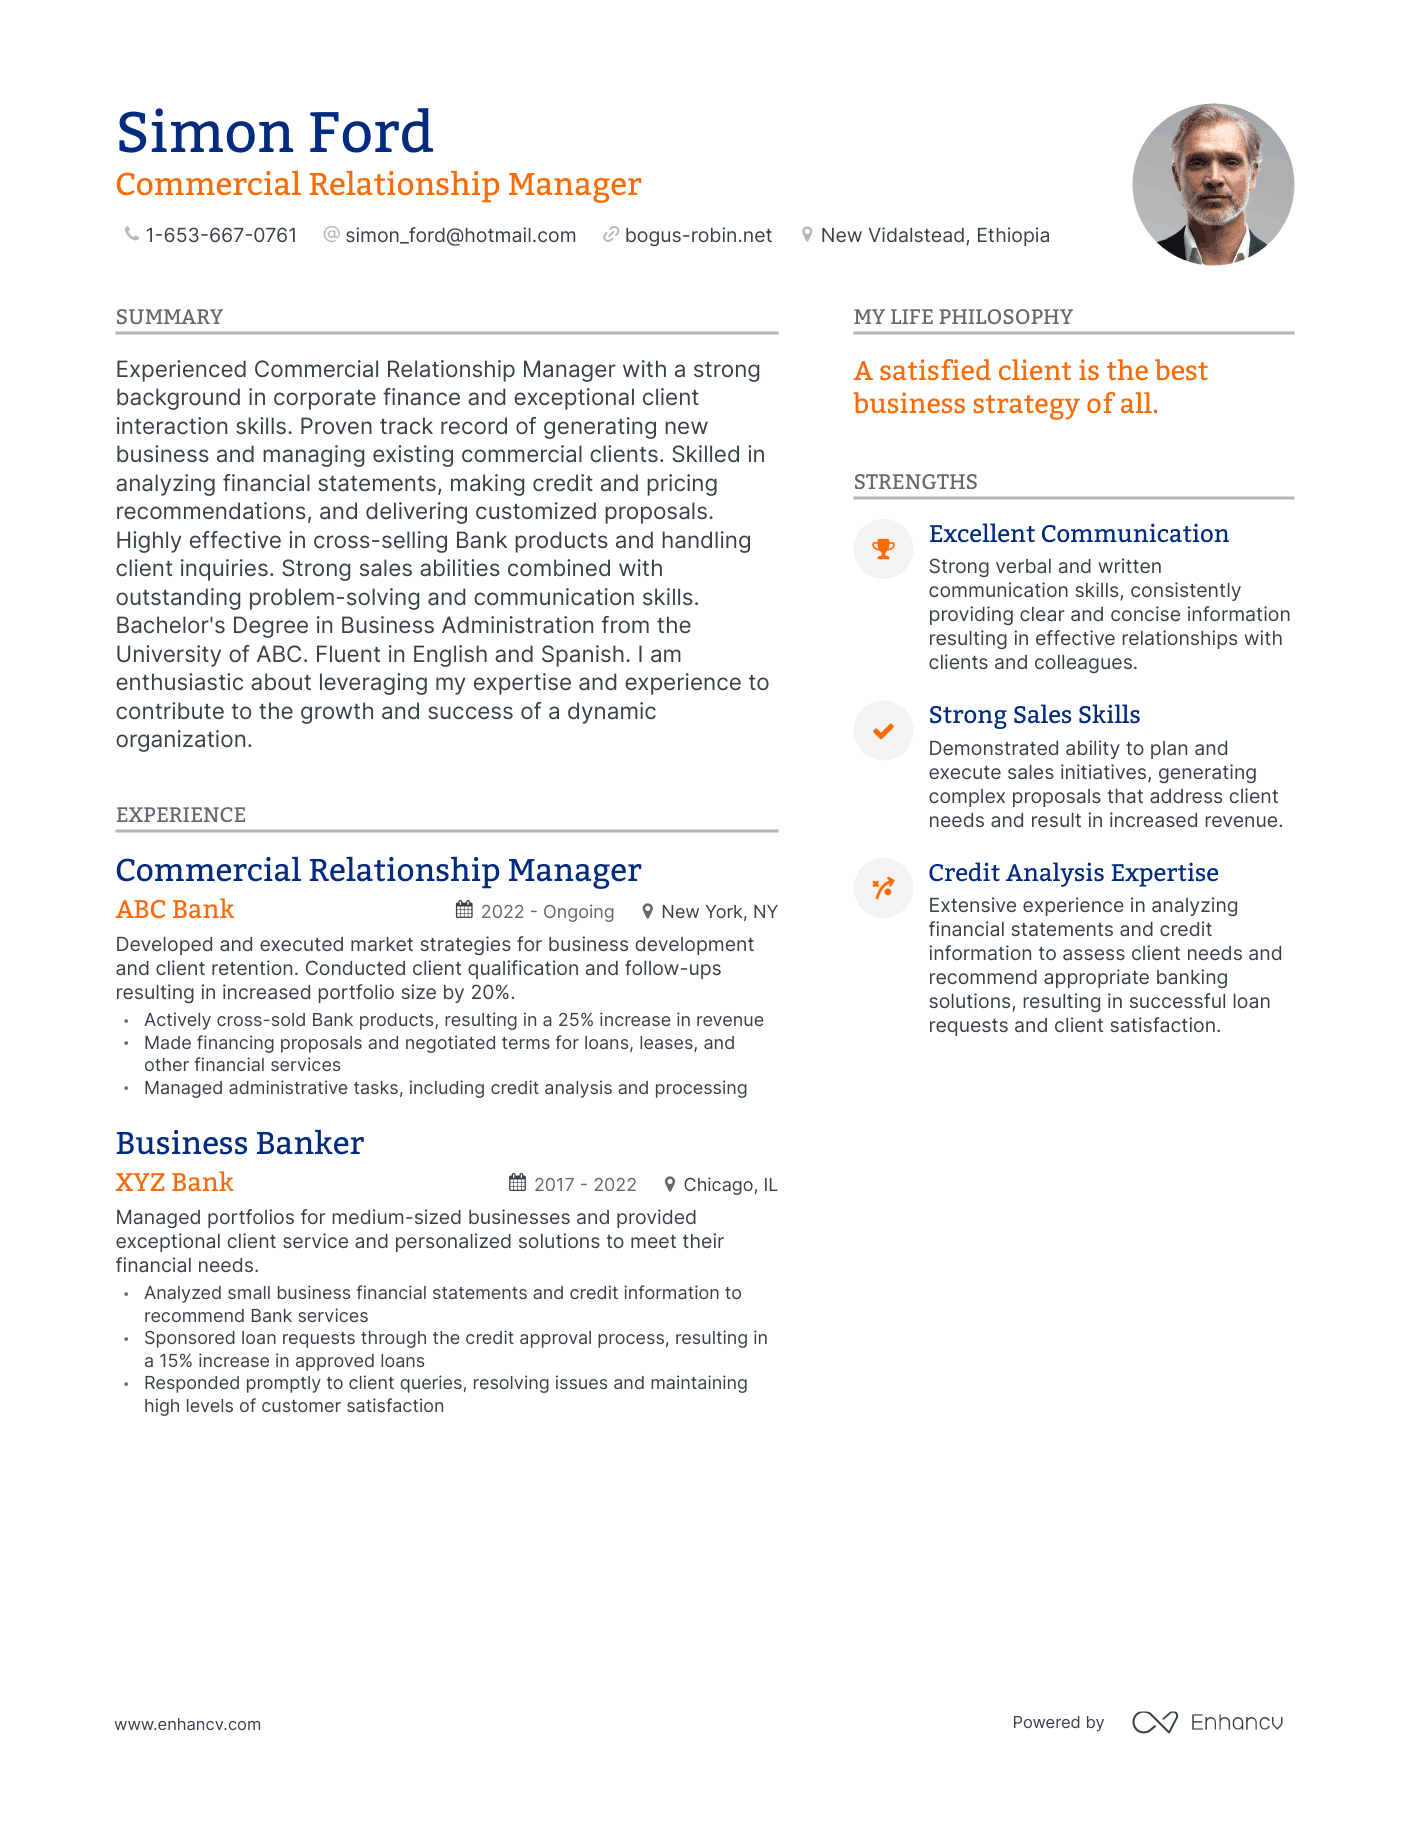 Commercial Relationship Manager resume example